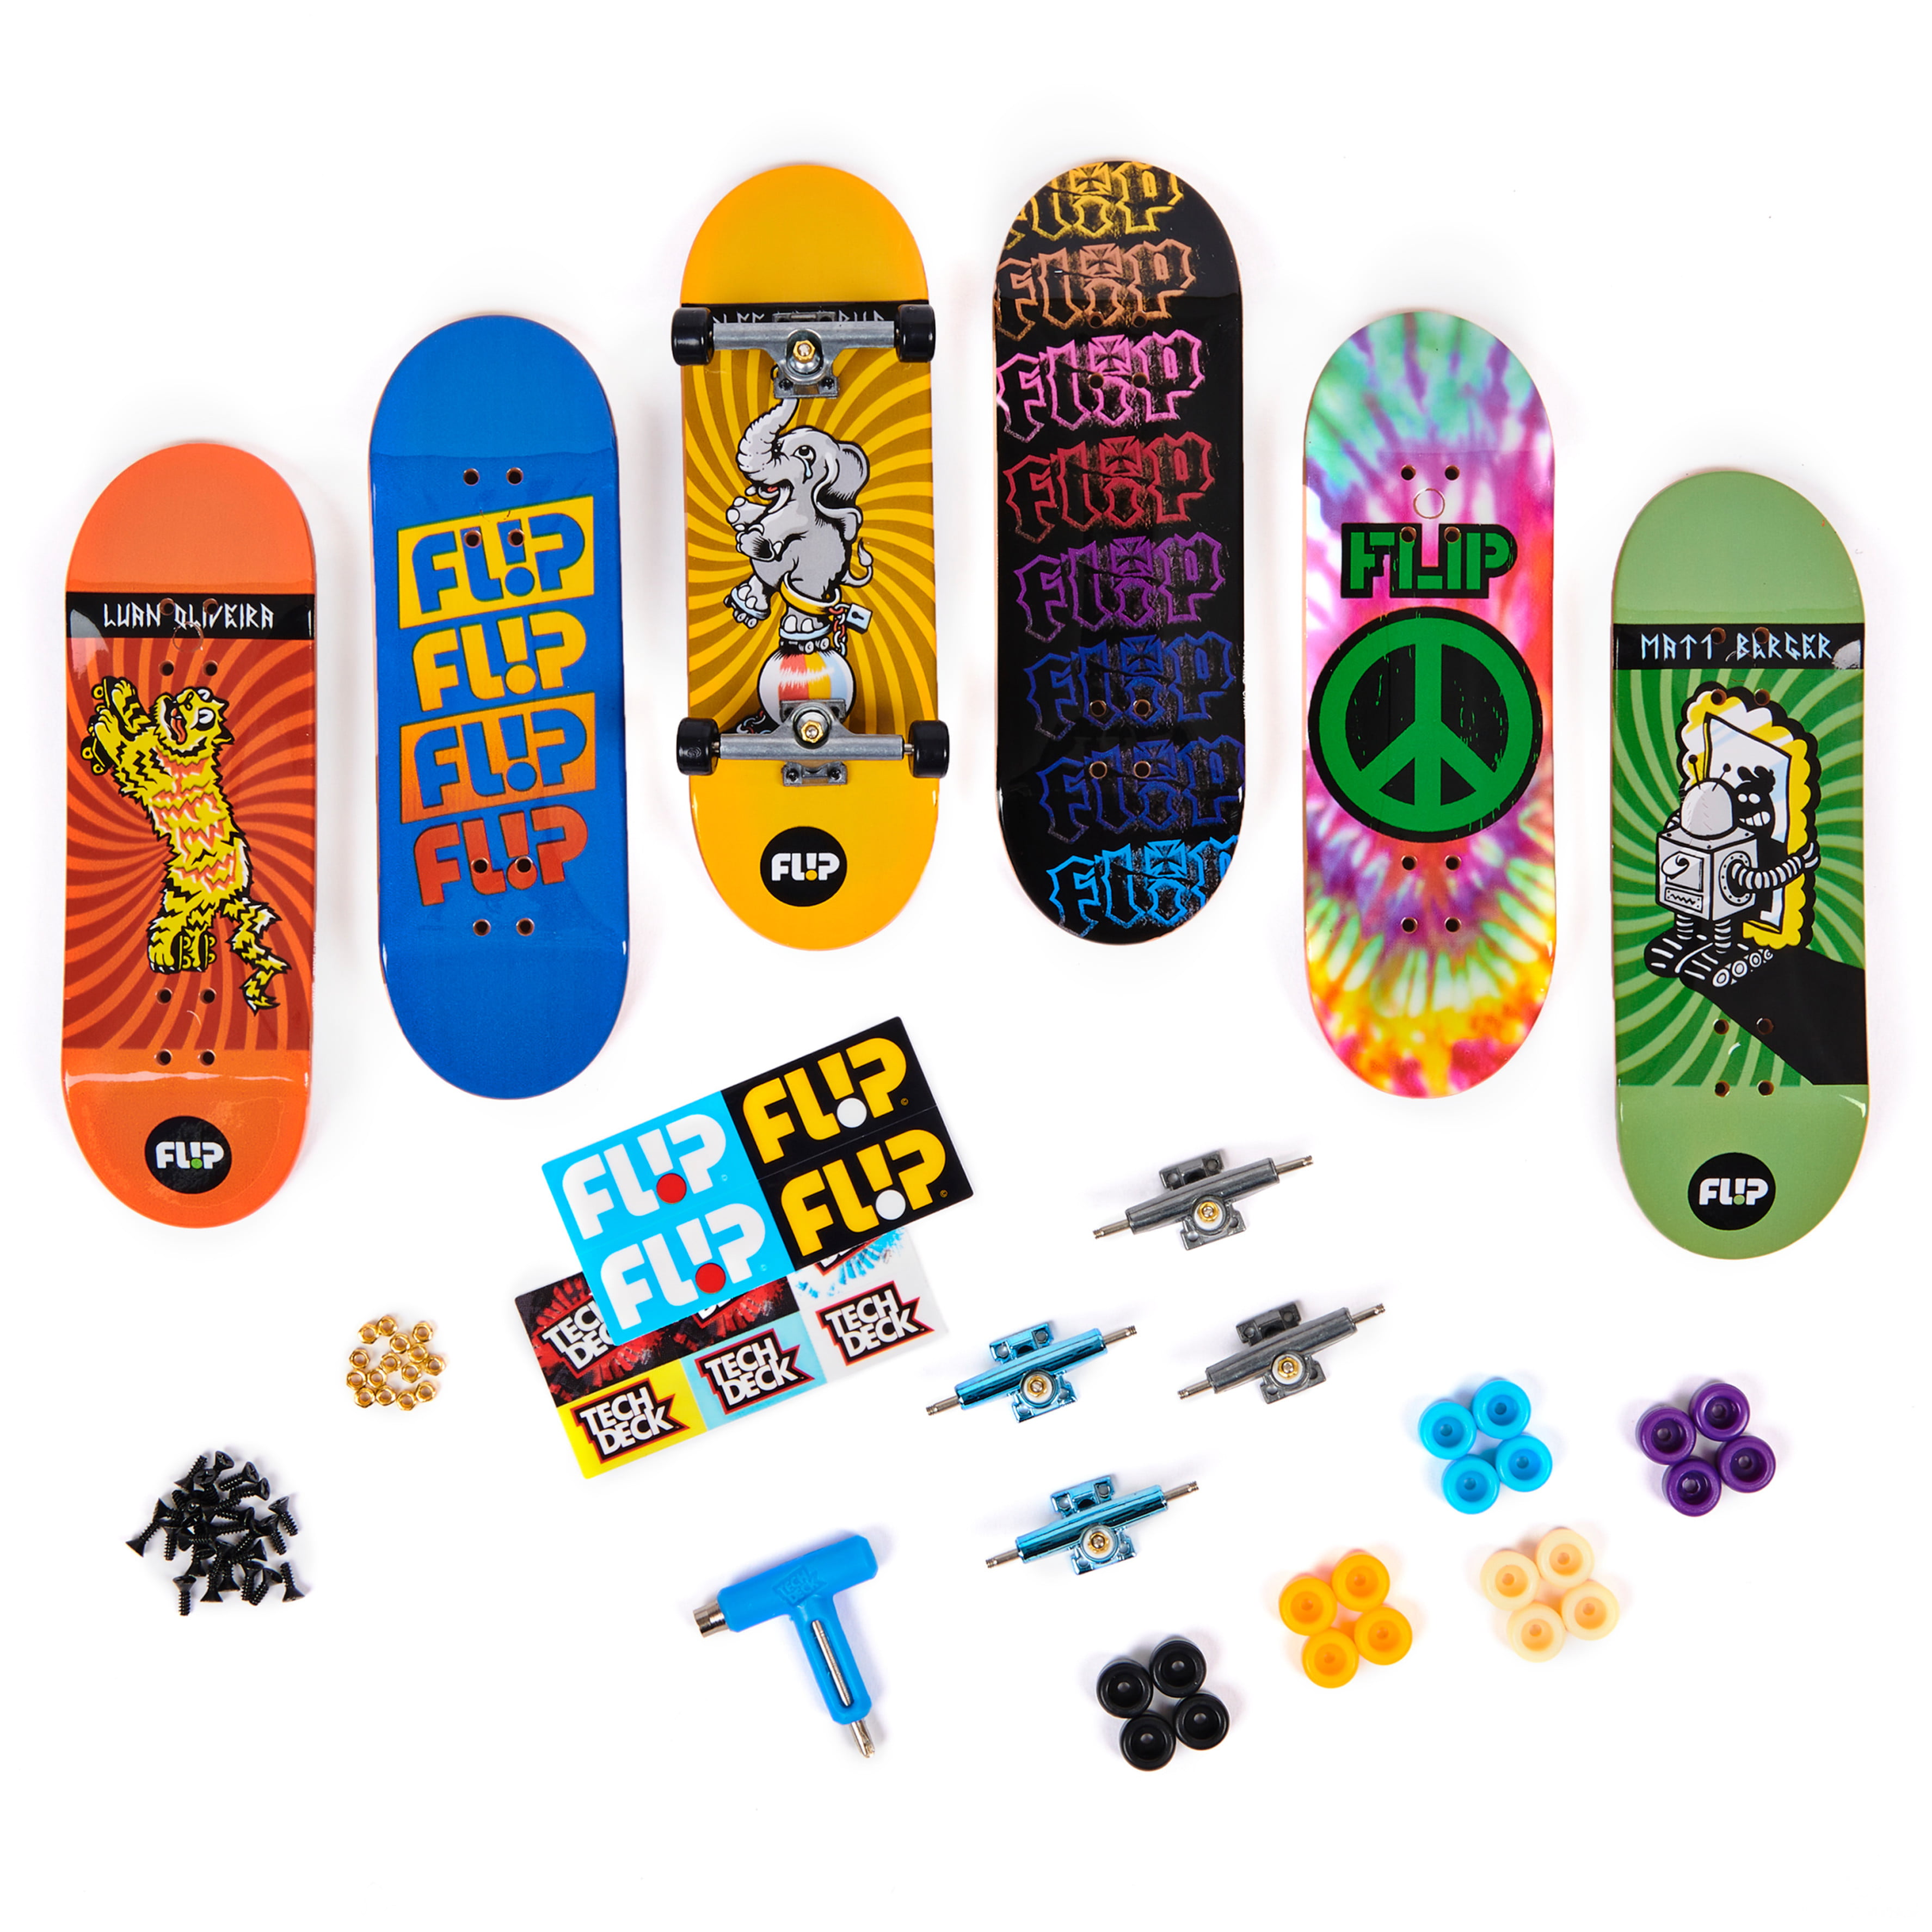 TECH DECK, Sk8shop Fingerboard Bonus Pack, Collectible and Customizable  Mini Skateboards, Kids Toys for Ages 6 and up (Styles May Vary)